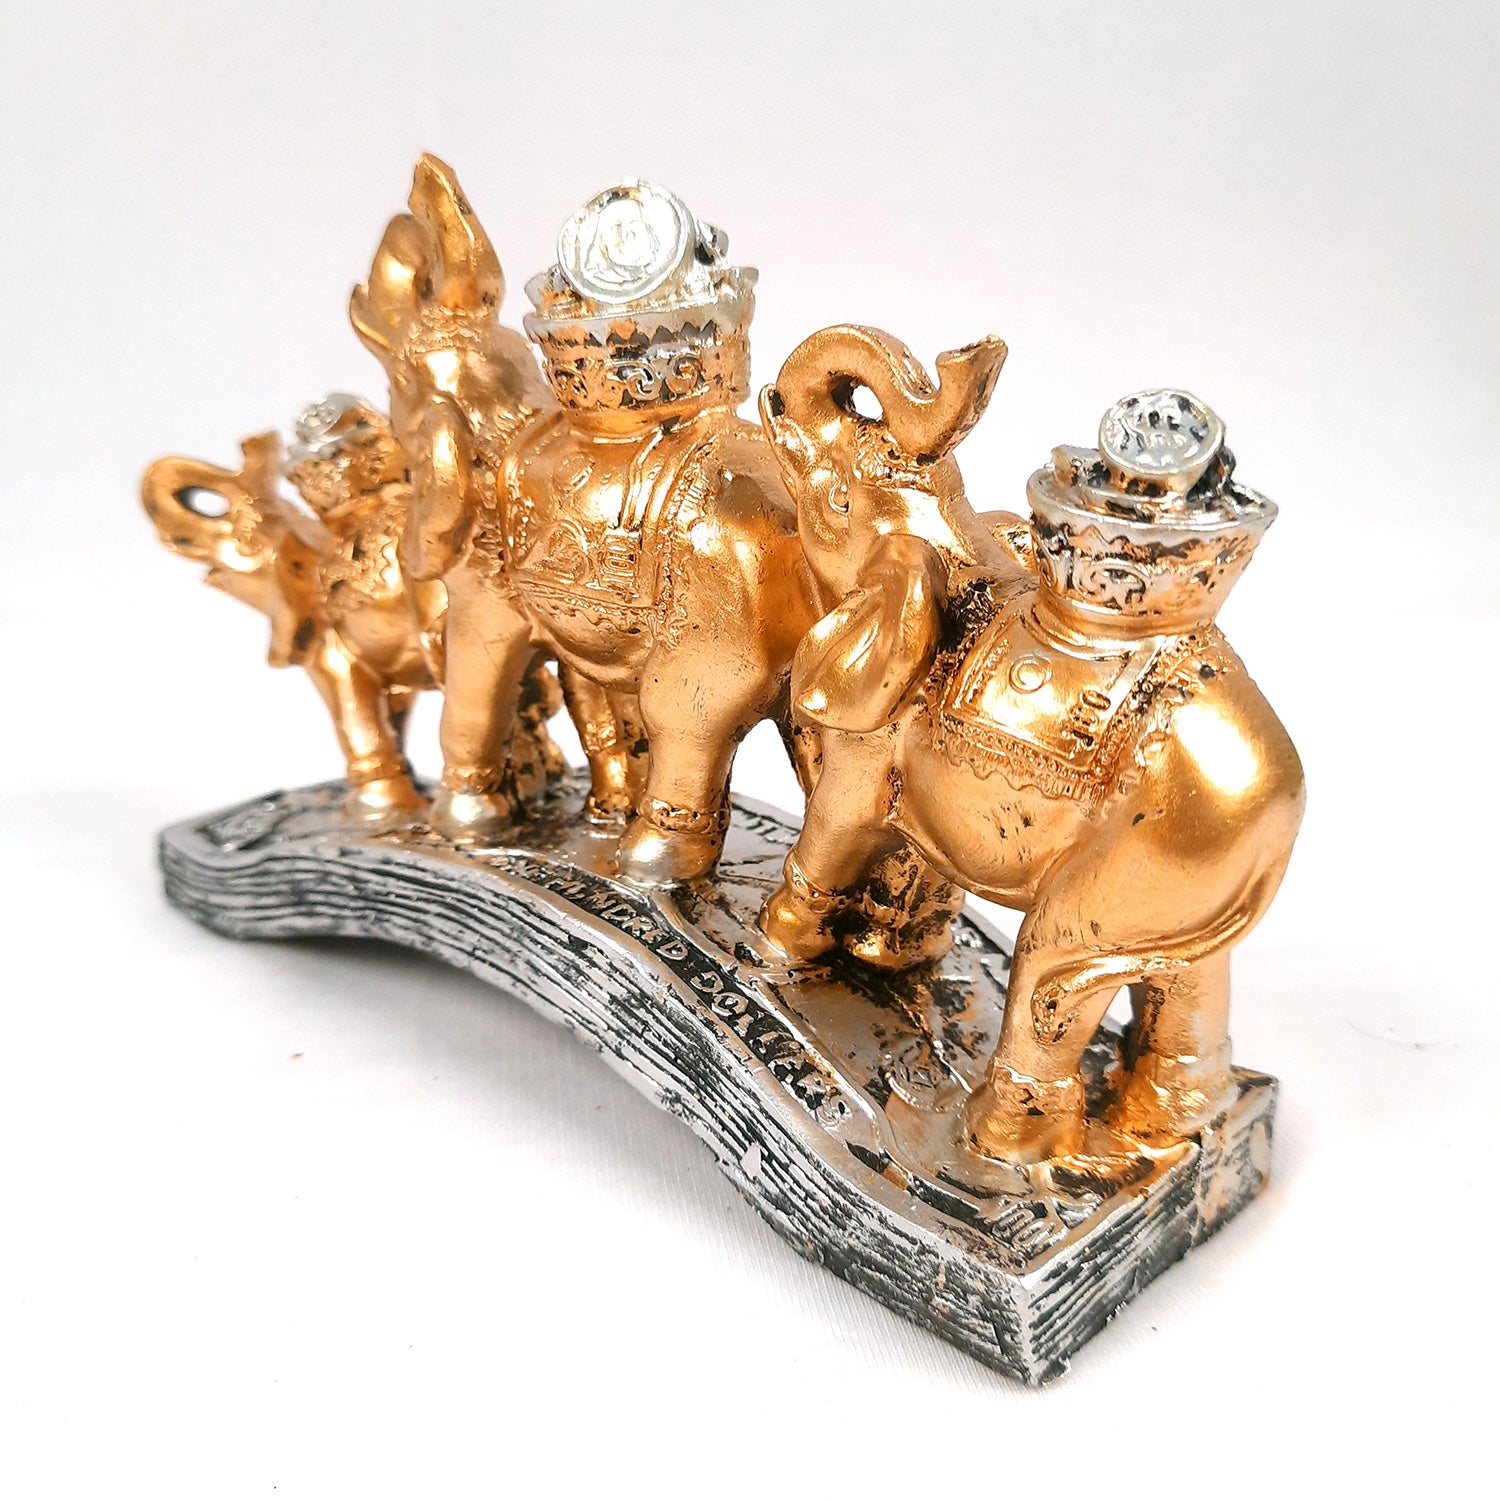 Elephant Statue Showpiece Trunk Up | Fengshui 3 Elephant Figurine With Gold Coins Pot - For Vastu, Good Fortune, Wealth, Strength | For Home Decor, Living Room, Office & Gift - 8 Inch - Apkamart